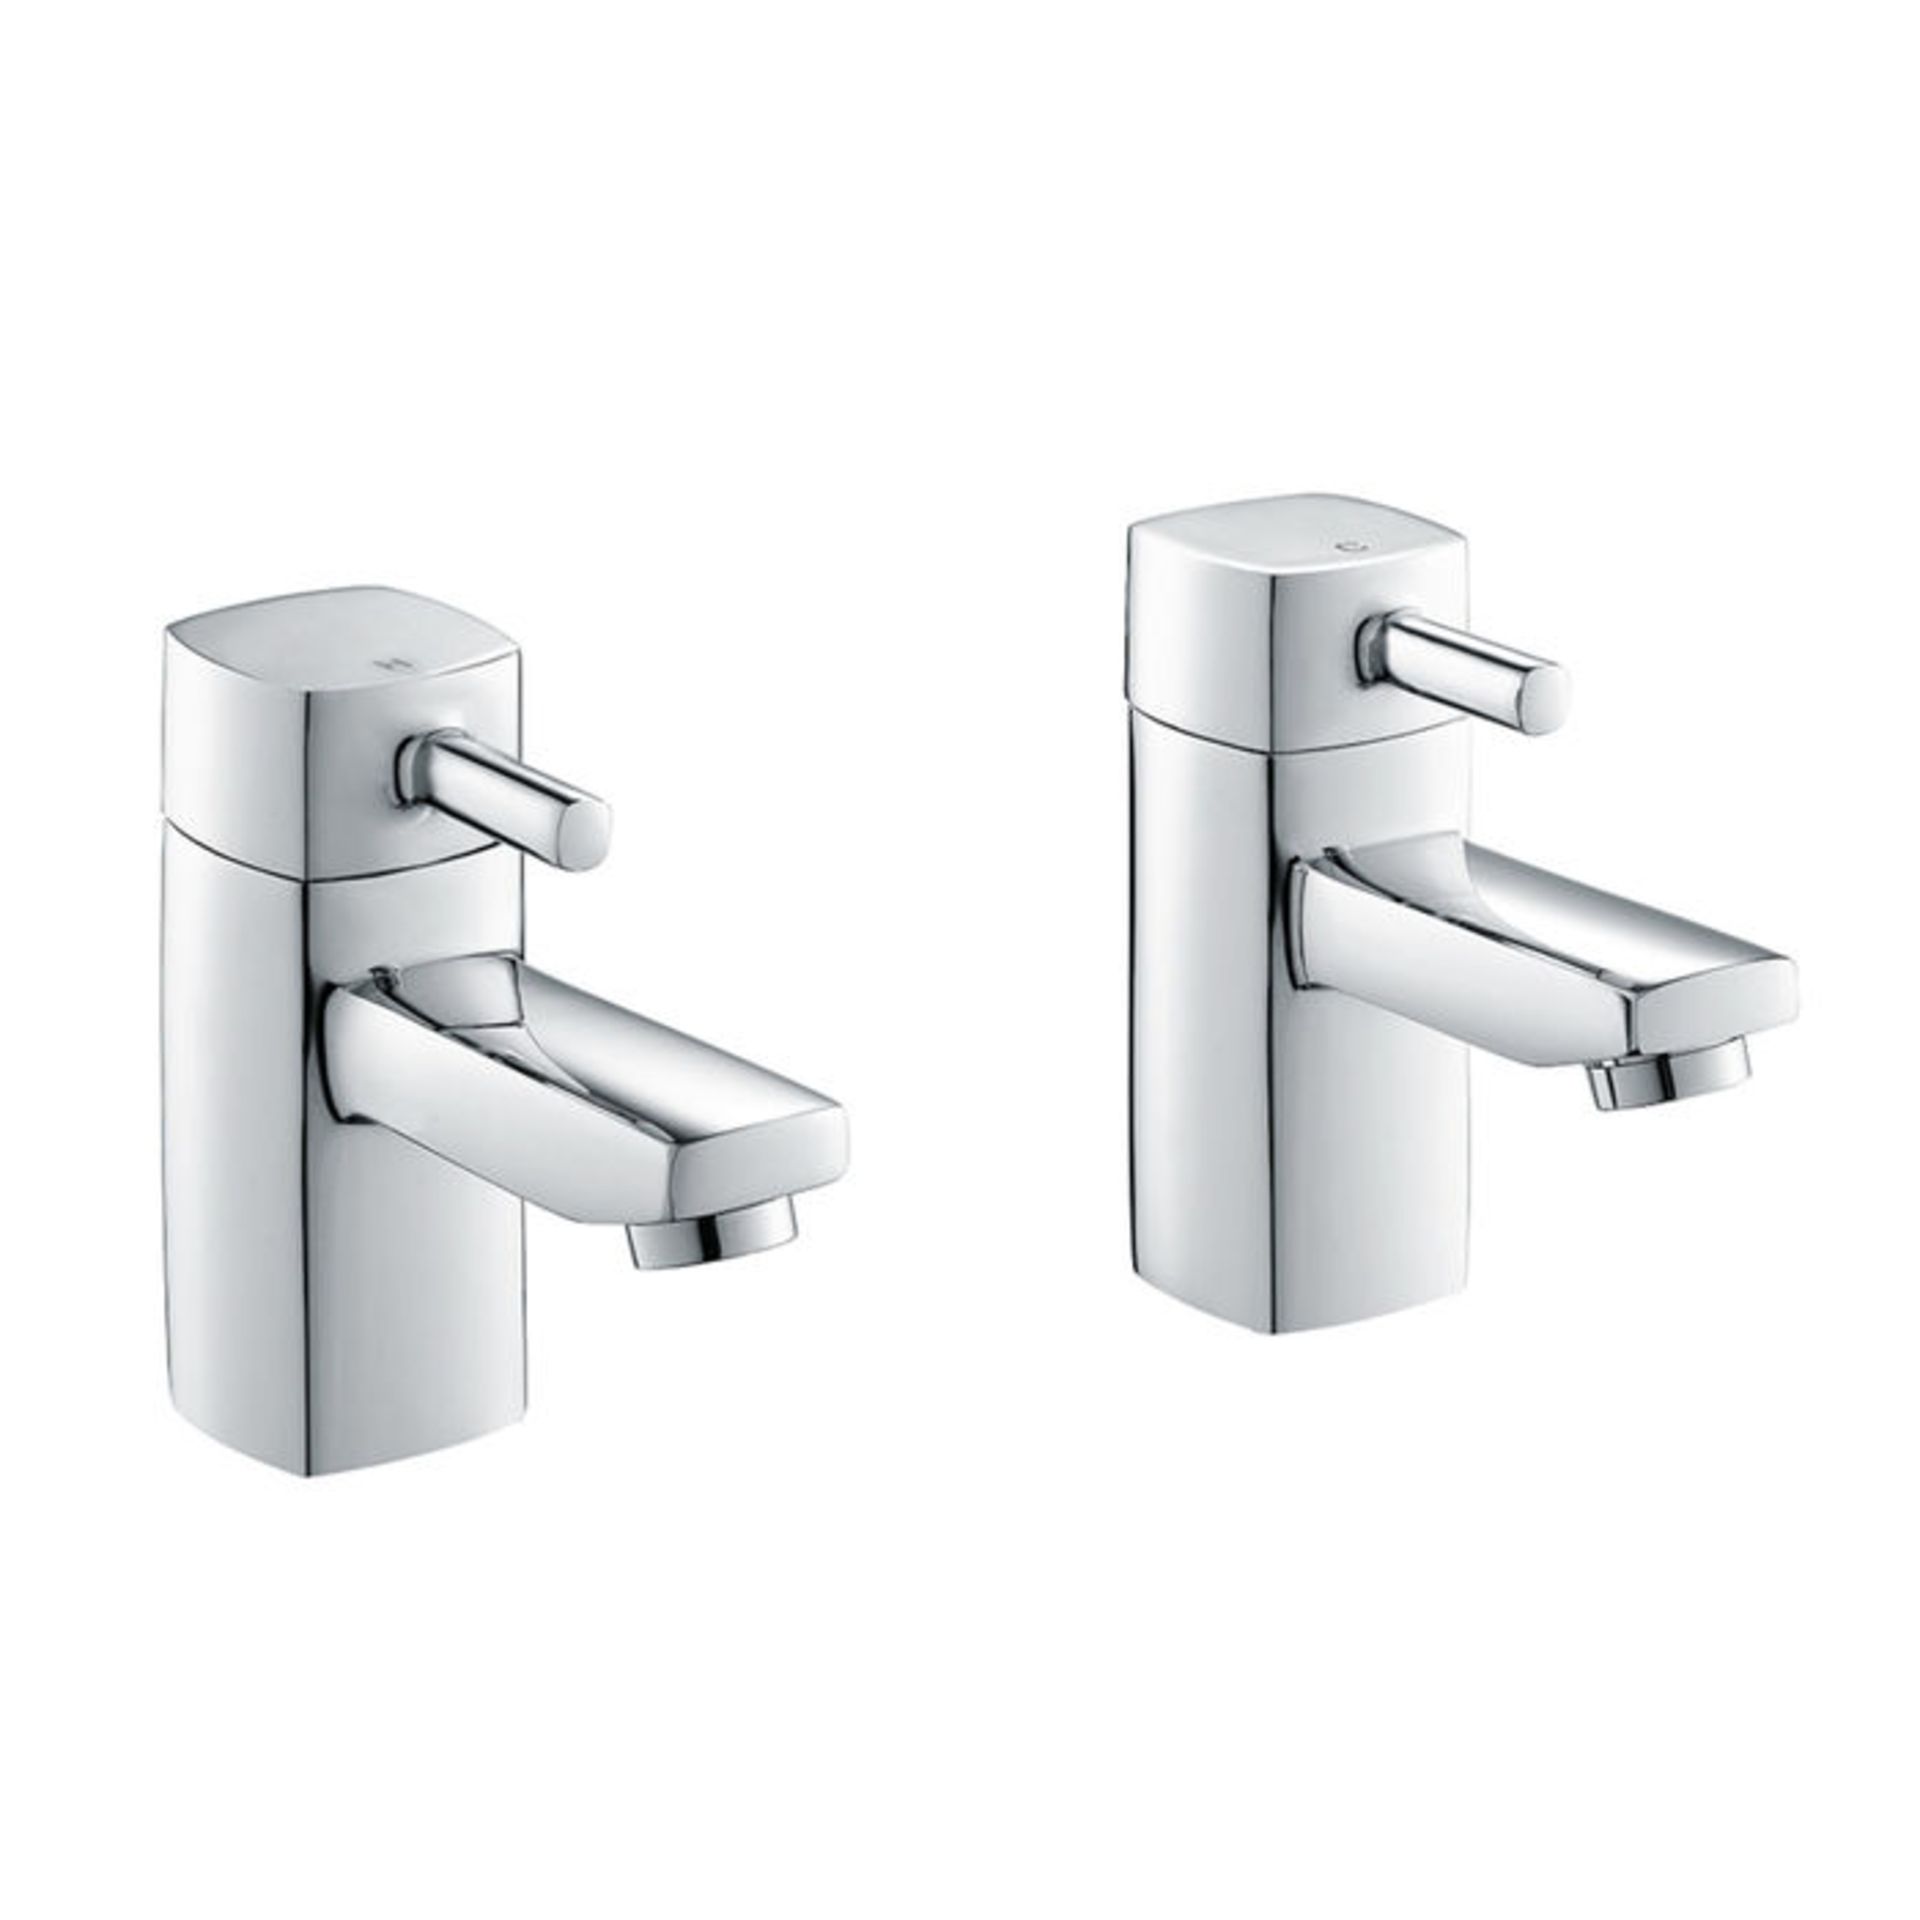 (M1090) Avon Hot & Cold Bath Taps. Chrome Plated Solid Brass 1/4 turn ceramic disc technology...